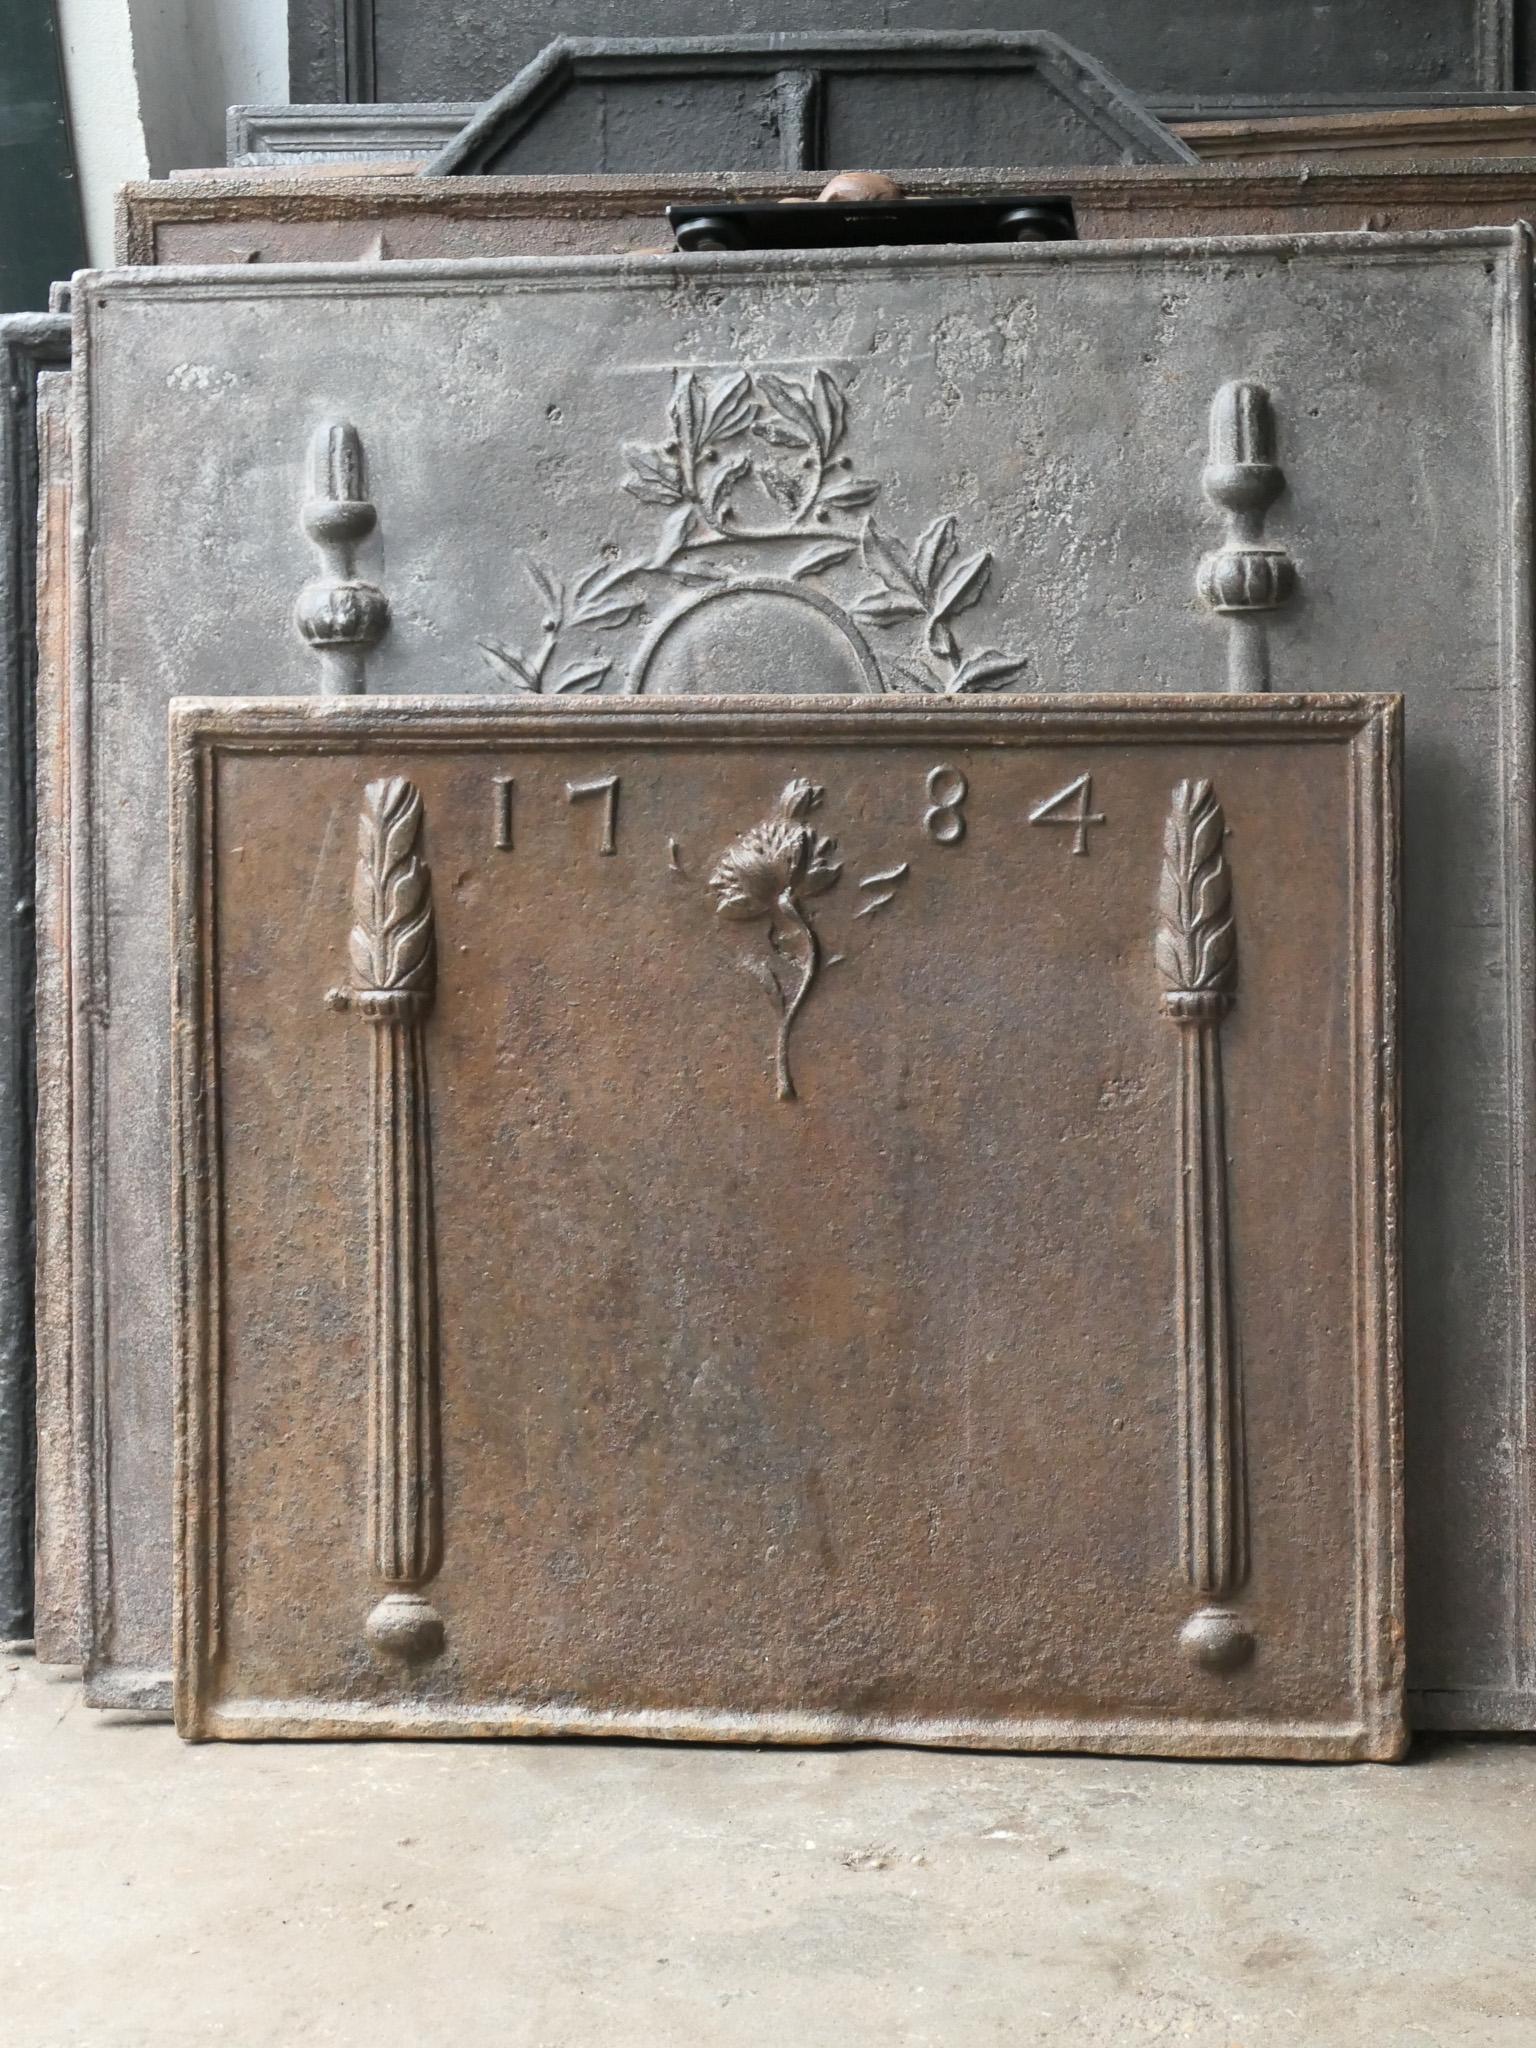 18th century French Louis XV fireback with two pillars. The date of production, 1784, is also cast in the fireback.

The fireback is made of cast iron and has a natural brown patina. Upon request it can be made black / pewter at no extra cost. It